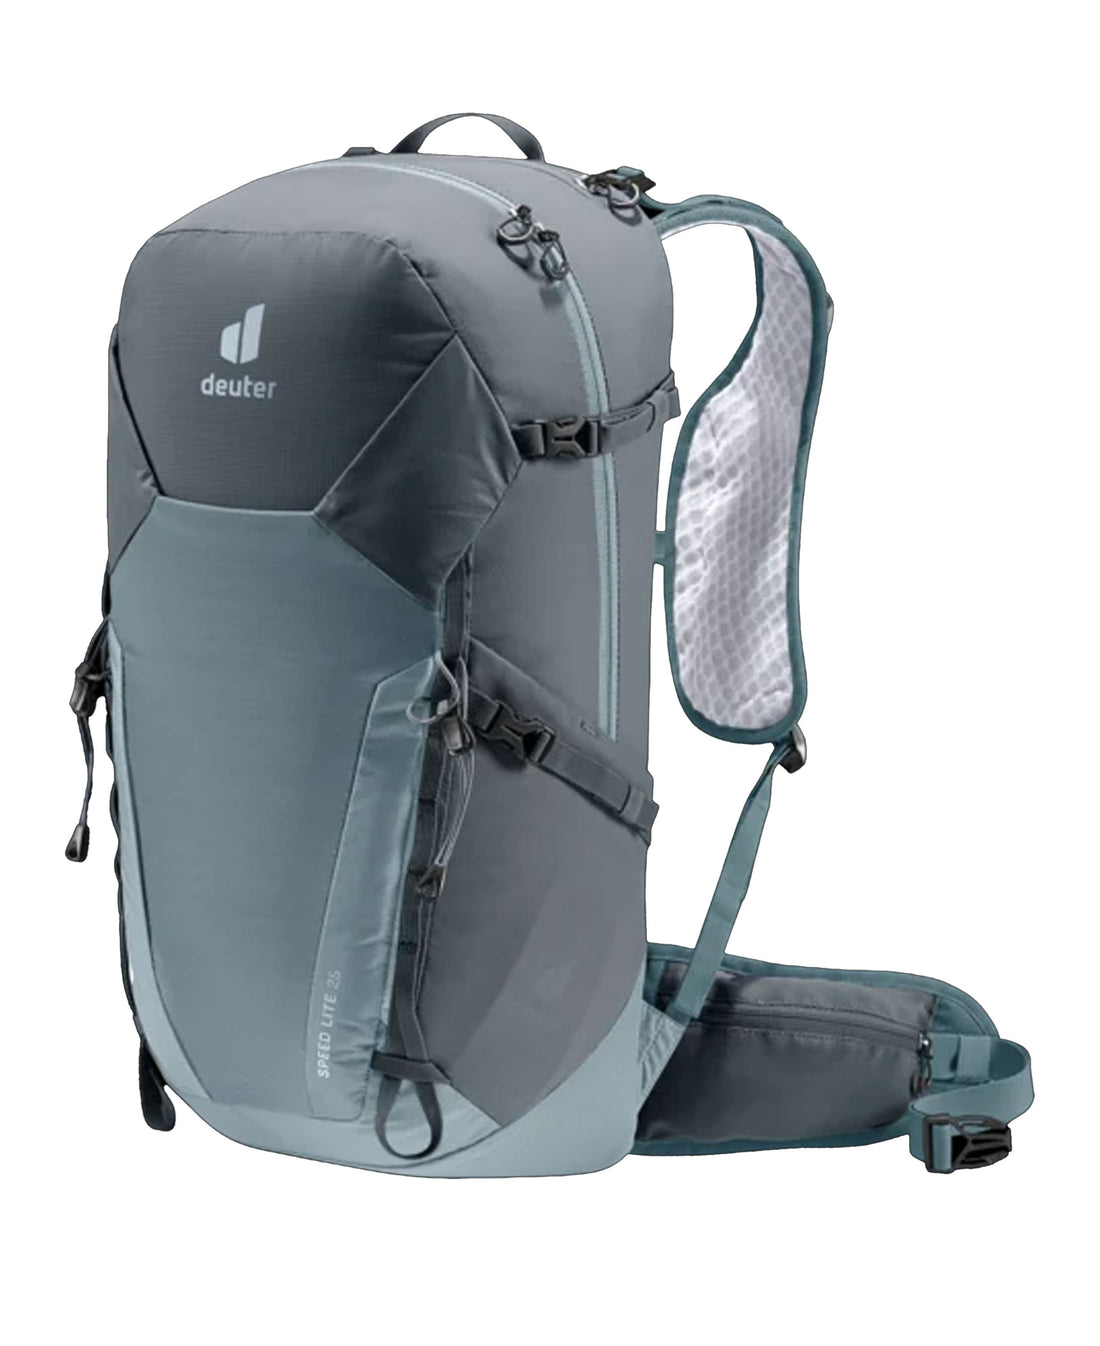 Speed Lite 25 Backpack - Graphite/Shale